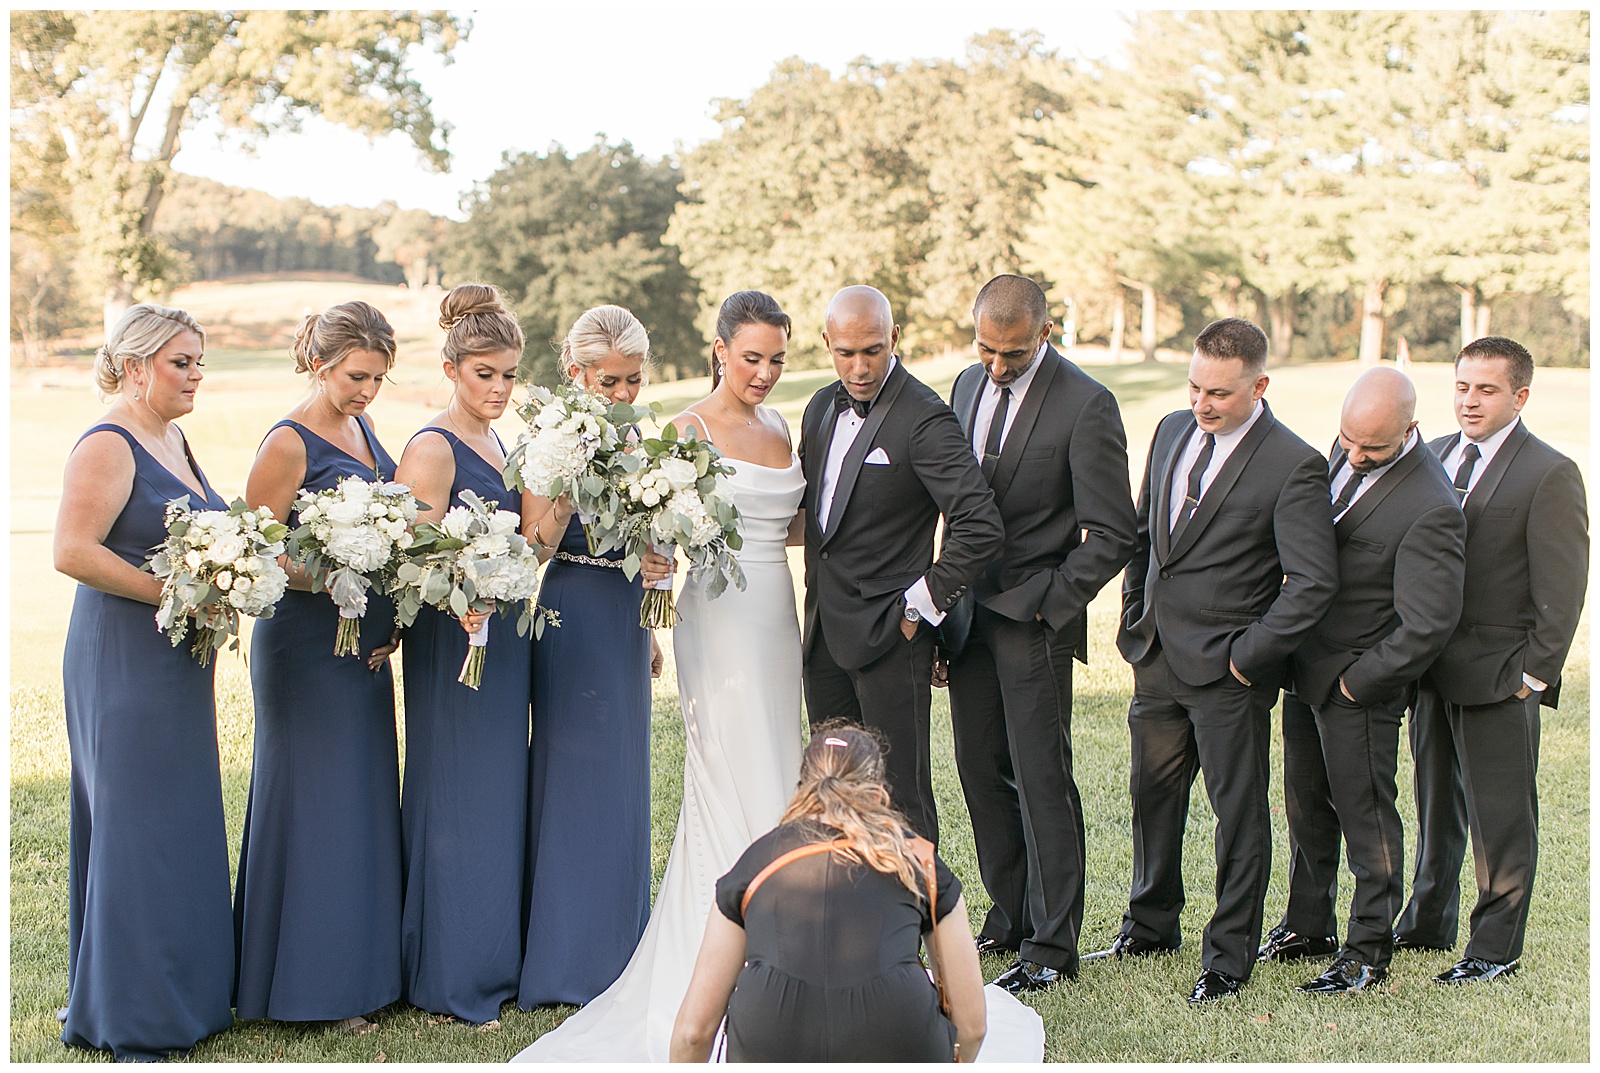 couple surrounded by bridal party as they all look down at photographer who's adjusting bride's dress train in front of them in new jersey